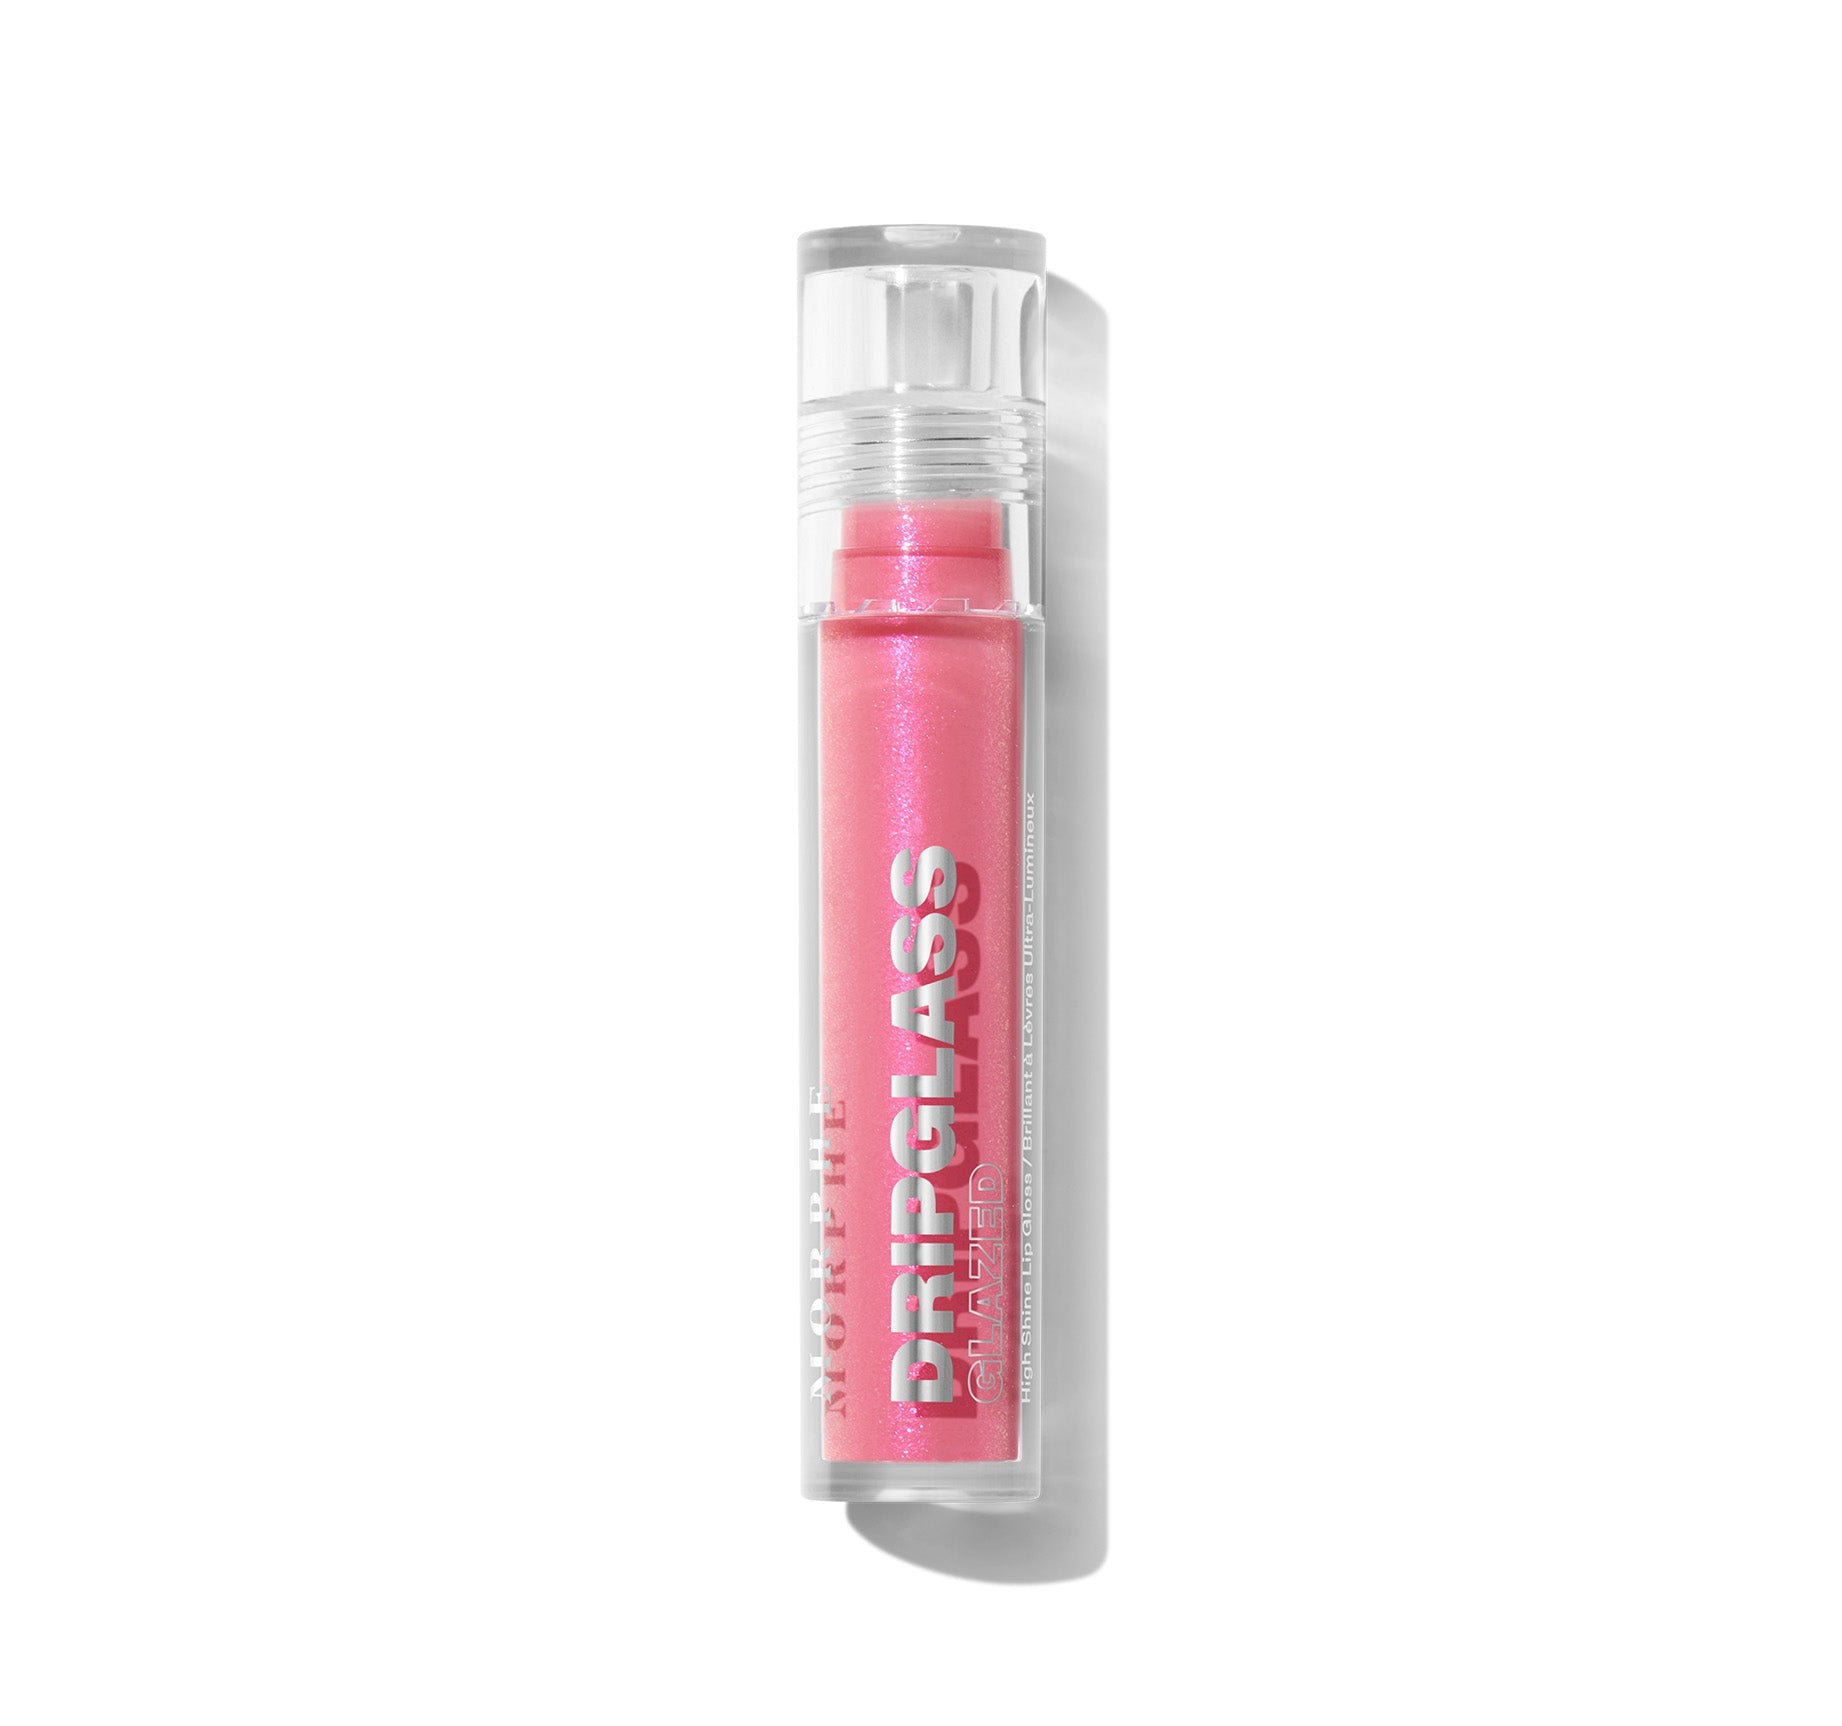 Dripglass Glazed High Shine Lip Gloss - Opalescent Orchid - Image 7